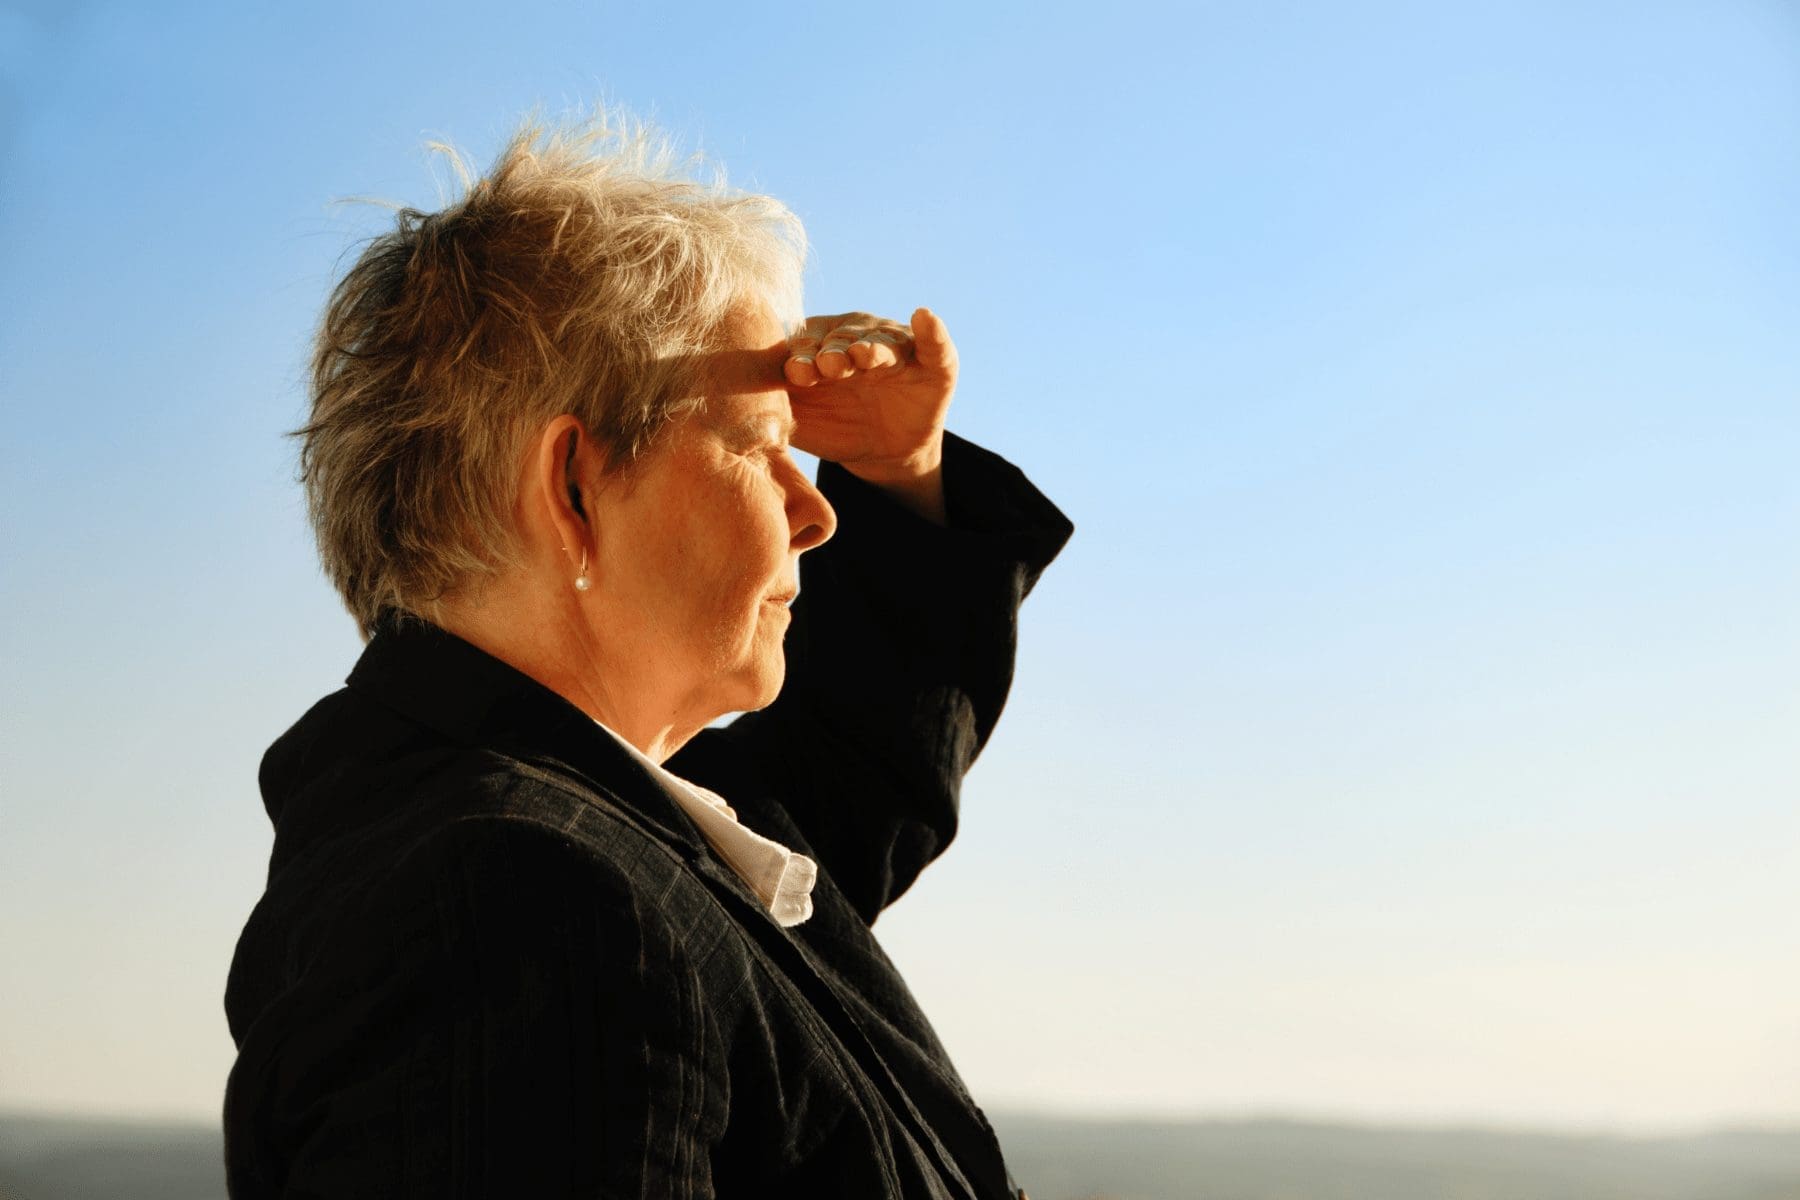 woman covering her eyes from sun, looking out at landscape illustrating commercial property insurance market outlook